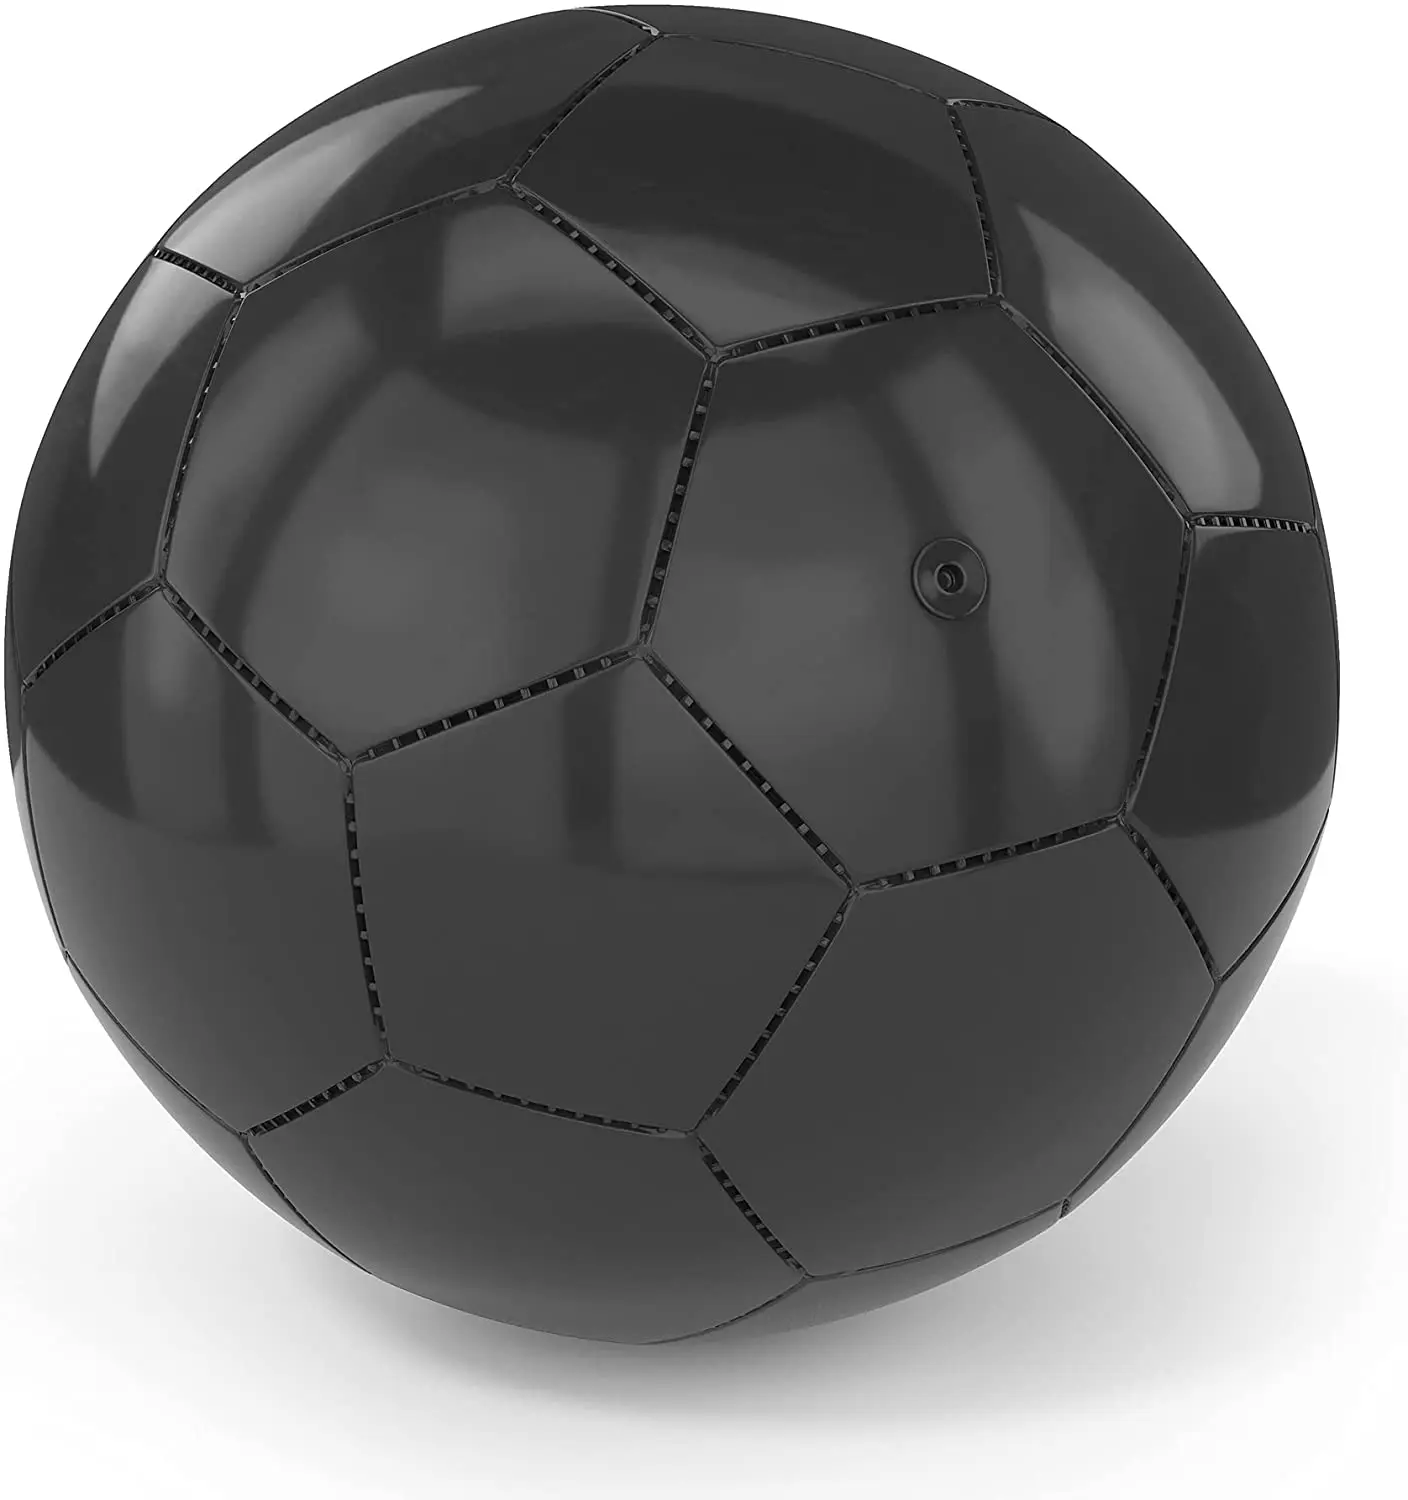 

Training Quality Soccer Ball PU/PVC Laminated Match Football Official Size and Weight, Customize color